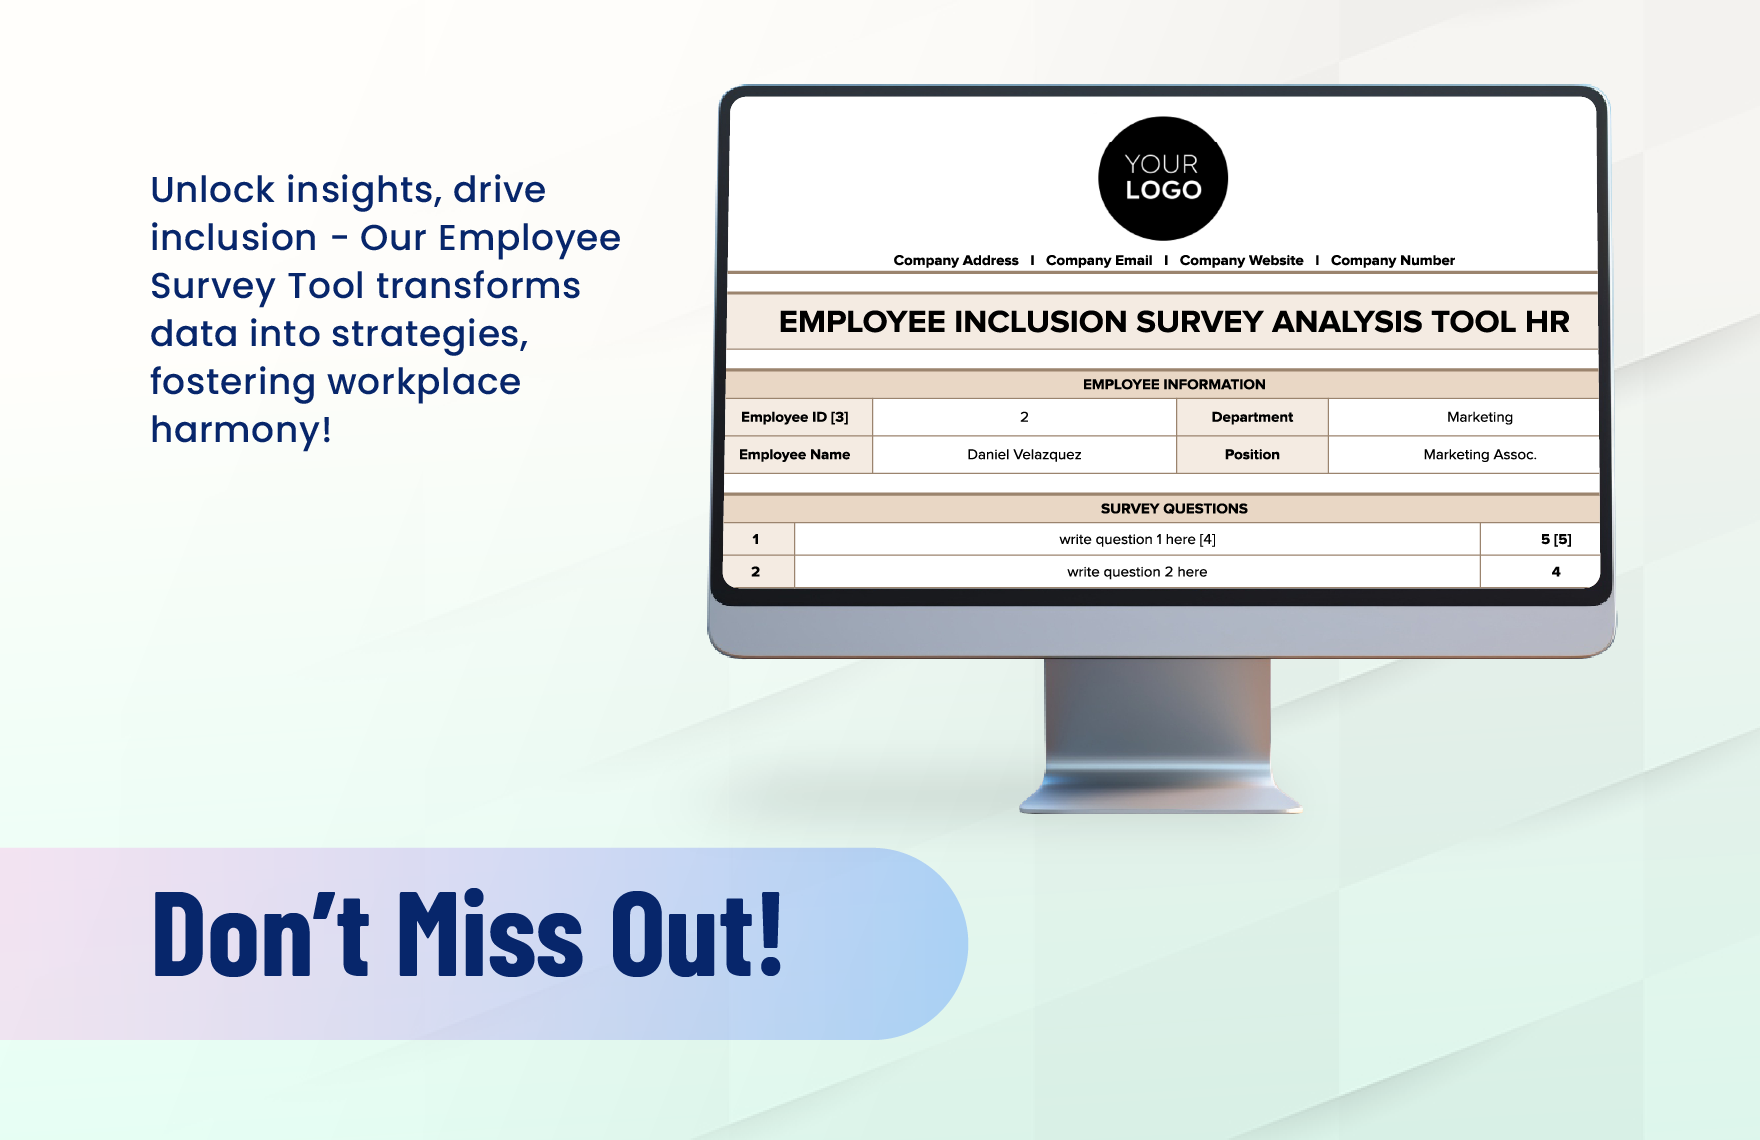 Employee Inclusion Survey Analysis Tool HR Template